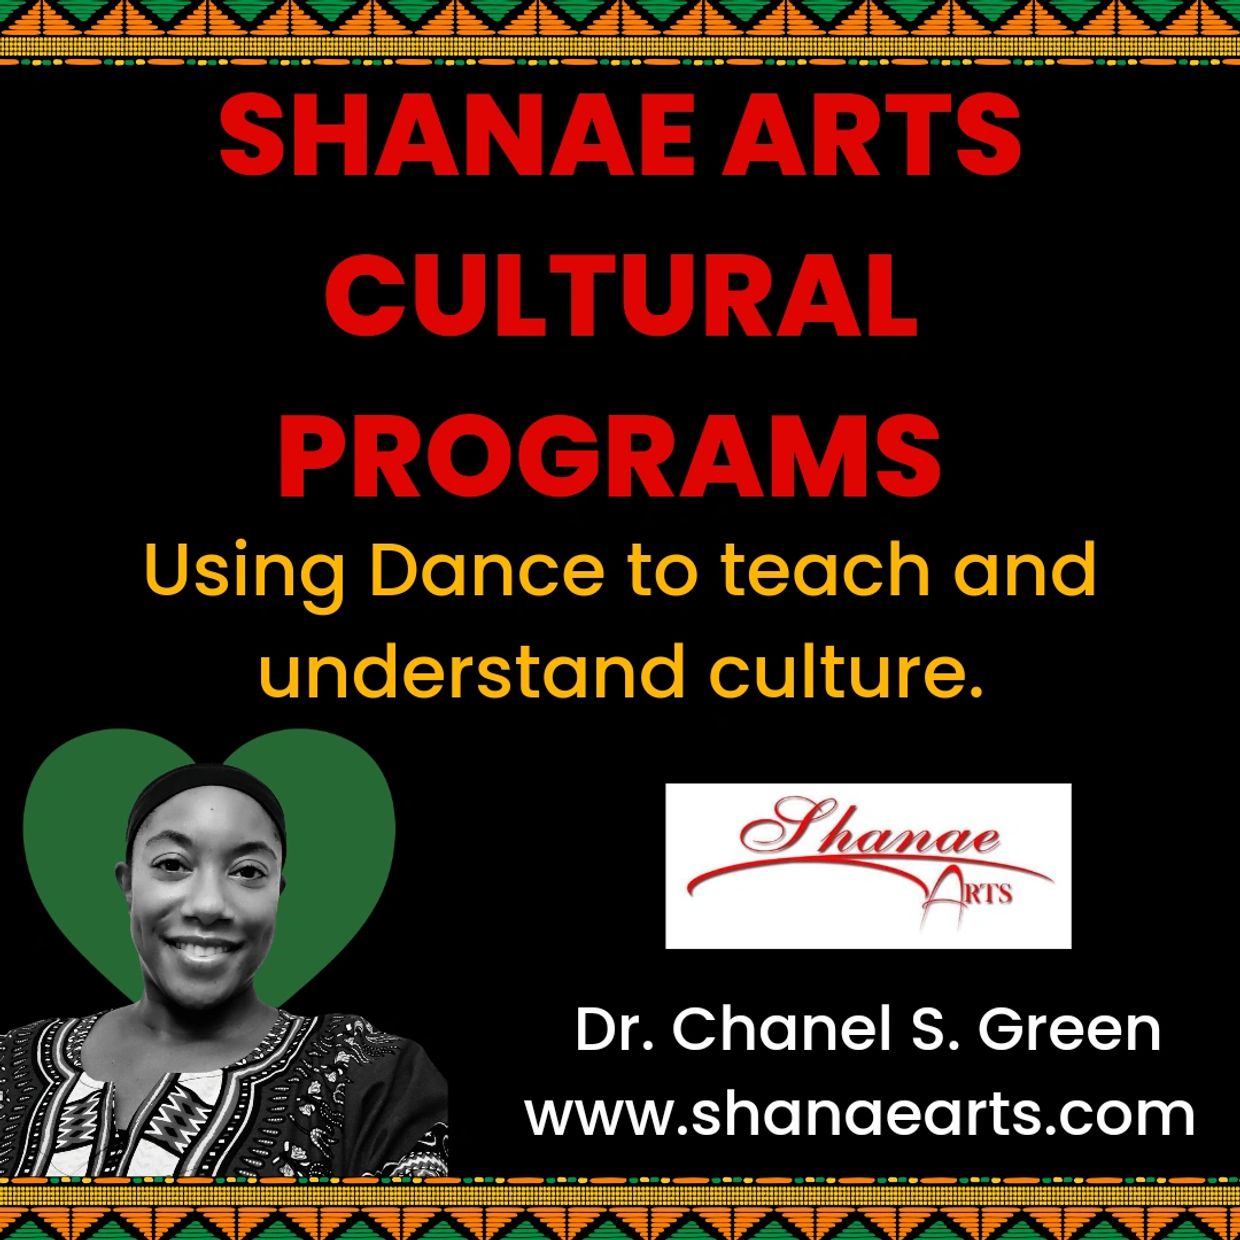 Shanae Arts Cultural Programs led by Dr. Chanel S. Green